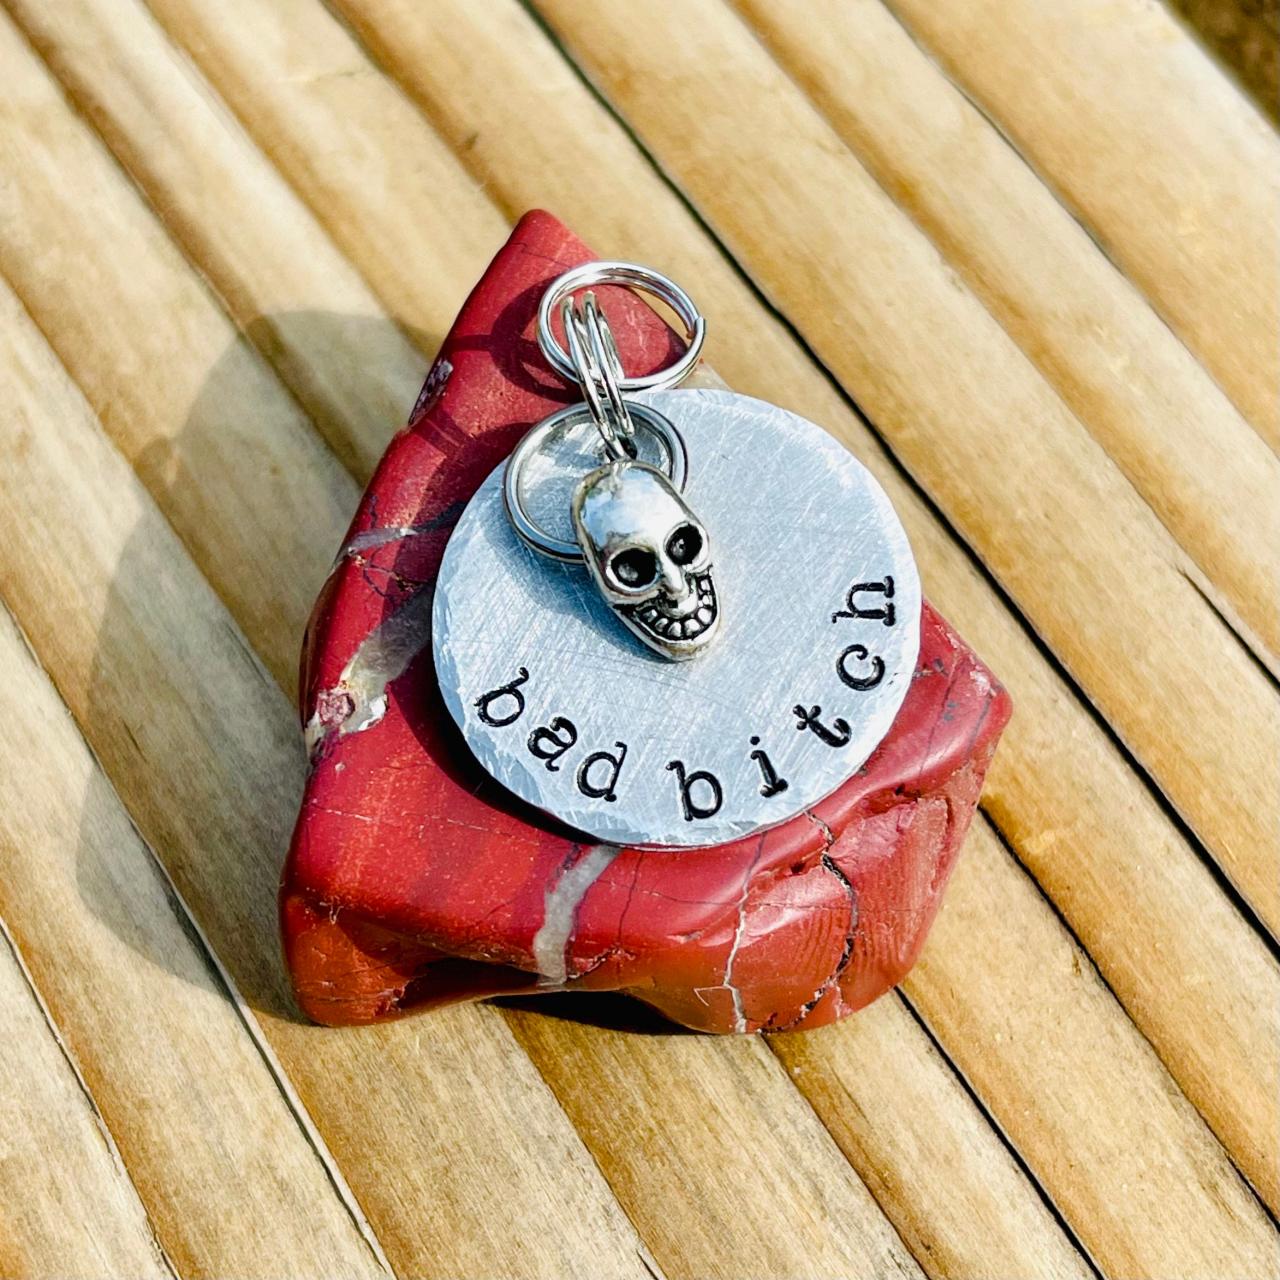 Bad Bitch Dog Tag, pet tag, hand stamped metal tag, stamped metal,Light Weight, Aluminum, Personalized tag, customizable, custom,